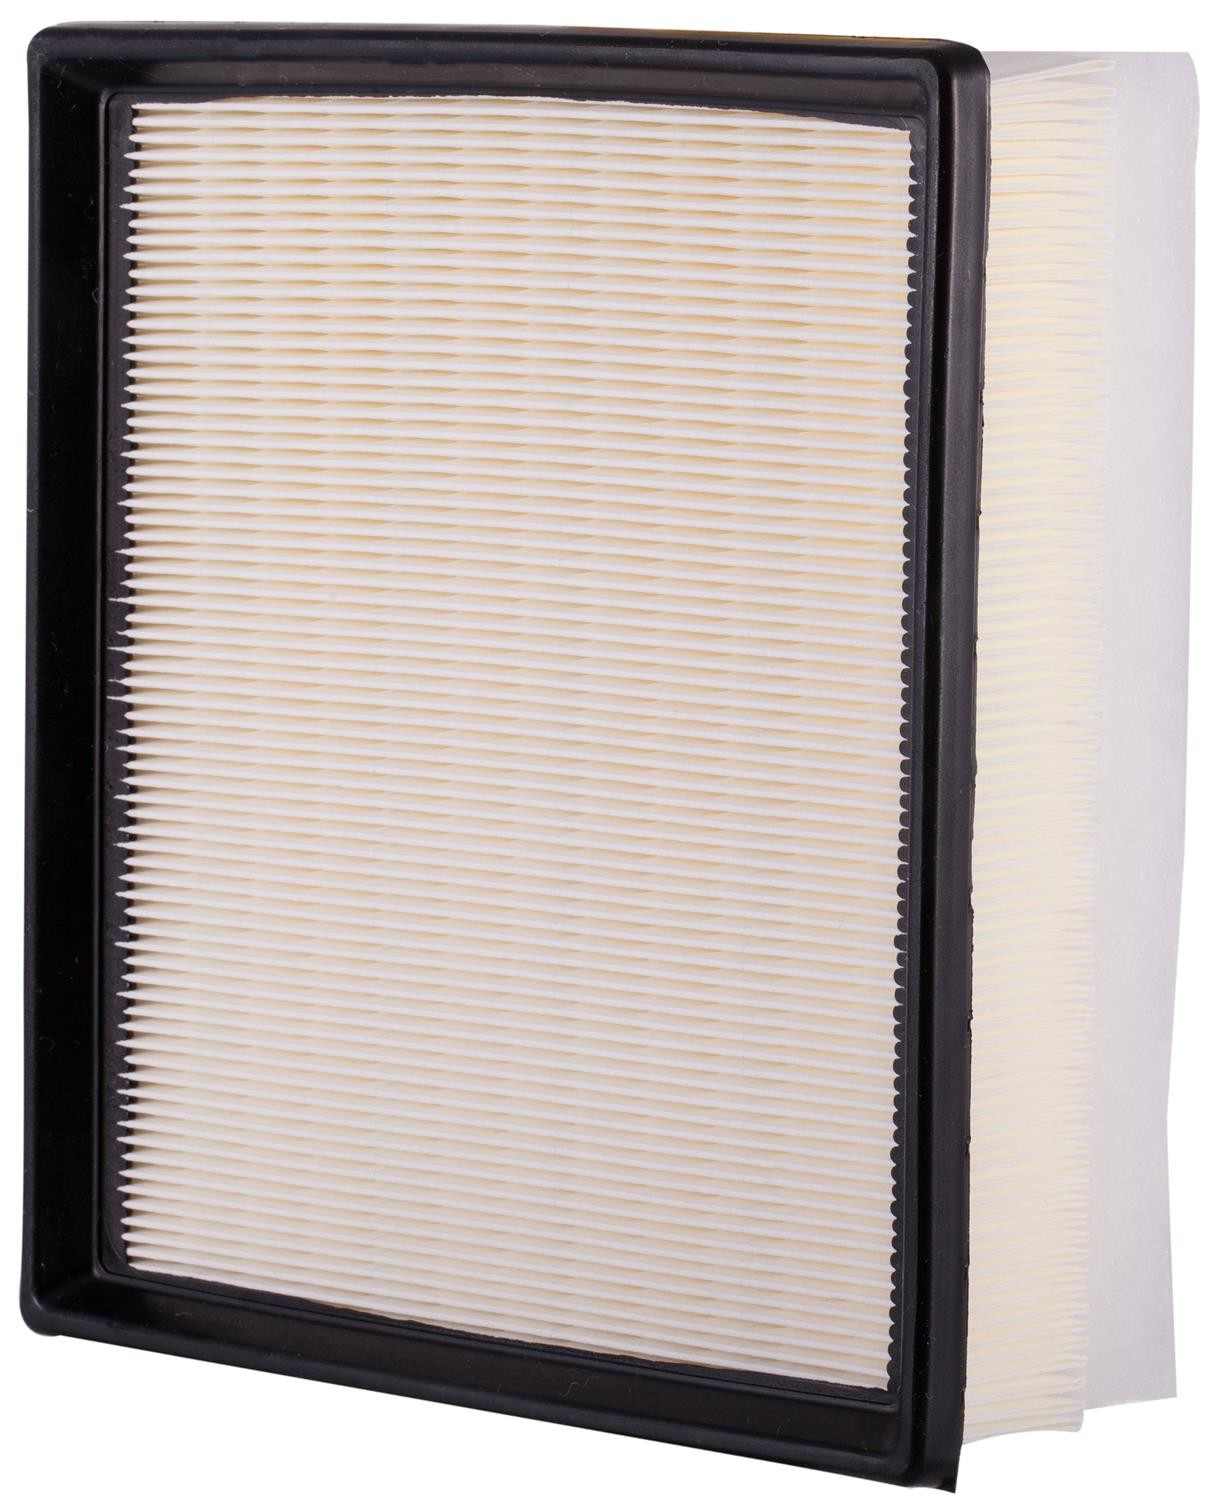 Back View of Air Filter PRONTO PA99002